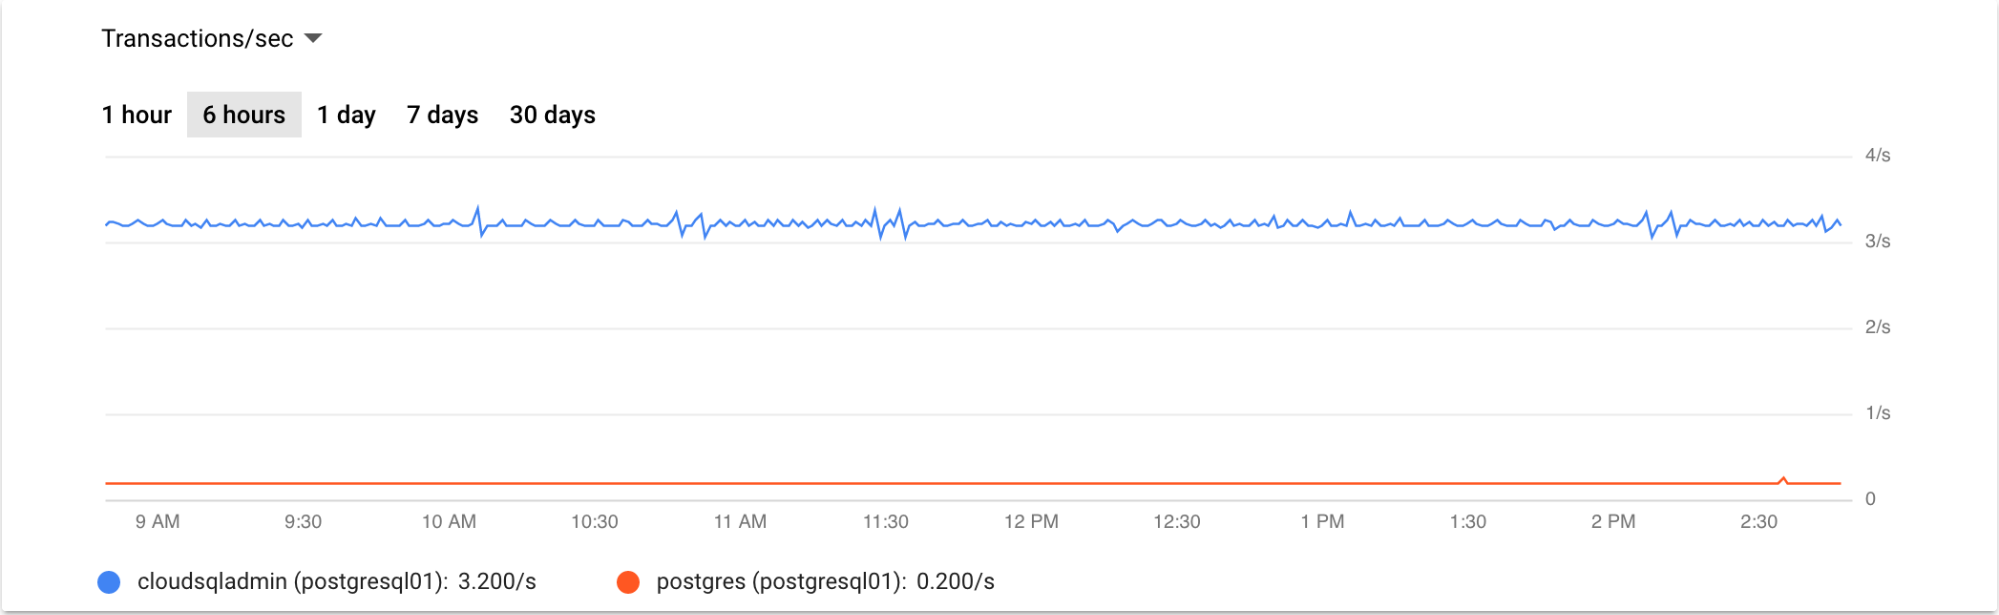 Queries graph for the last 12 hours.